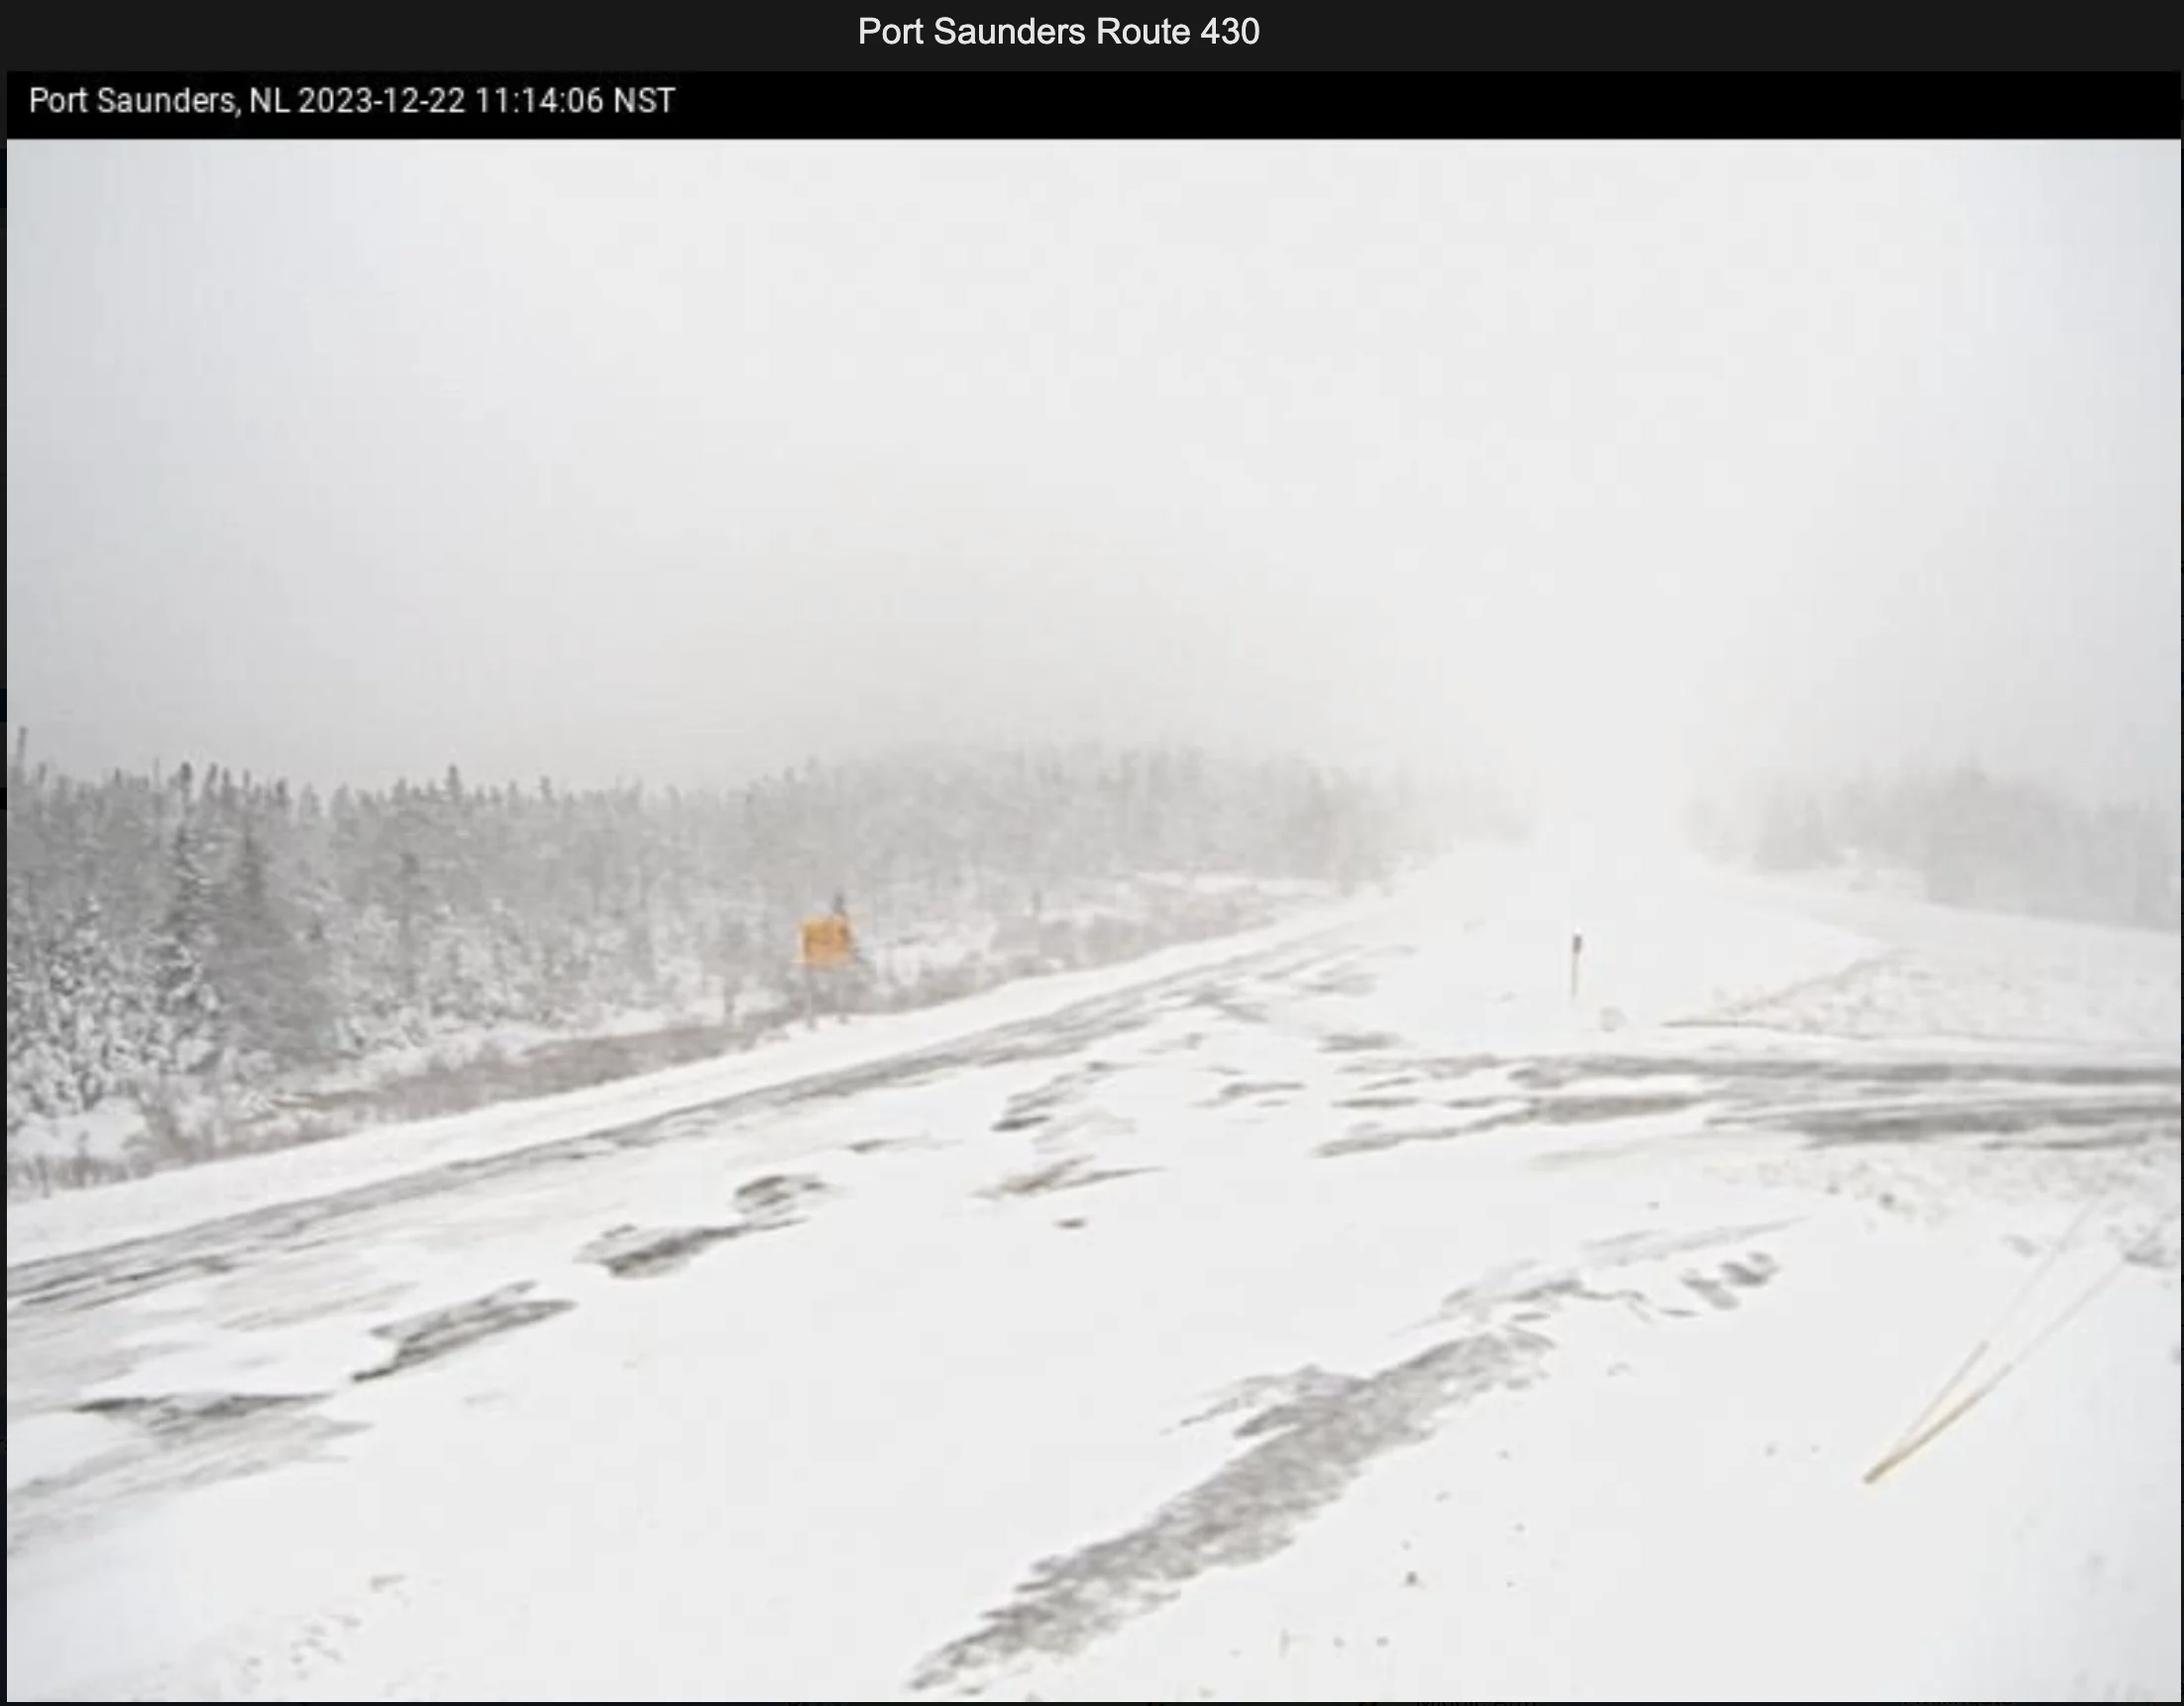 511nl.ca: Snow in Port Saunders, NL, captured by web cam at 11:14 NST (511nl.ca)